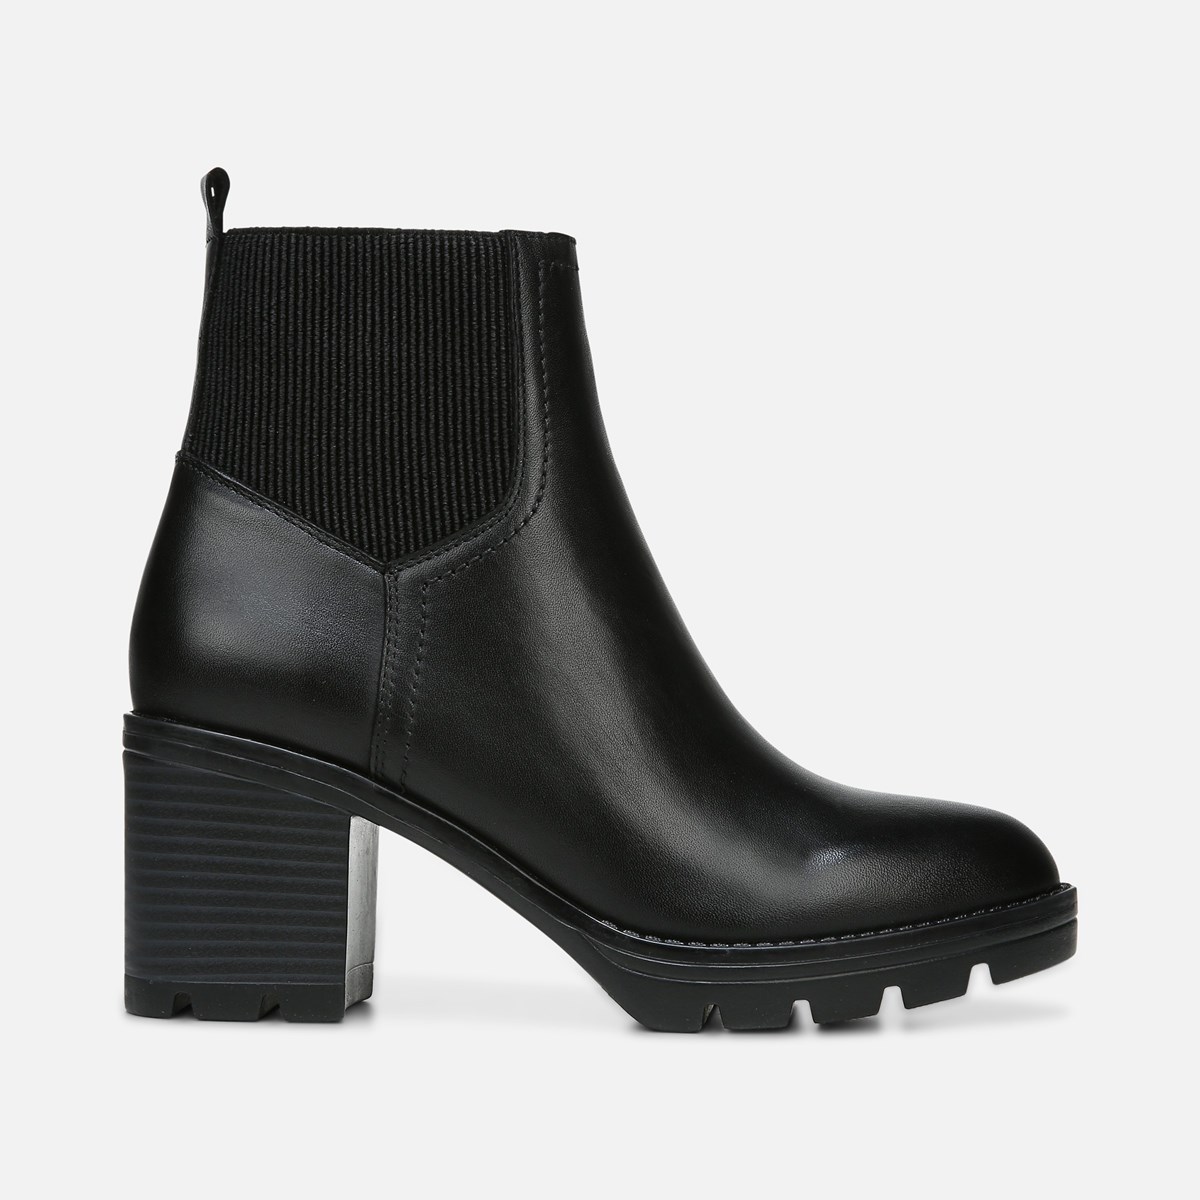 Naturalizer.com | Naturalizer Verney Waterproof Boot in Black Leather Boots